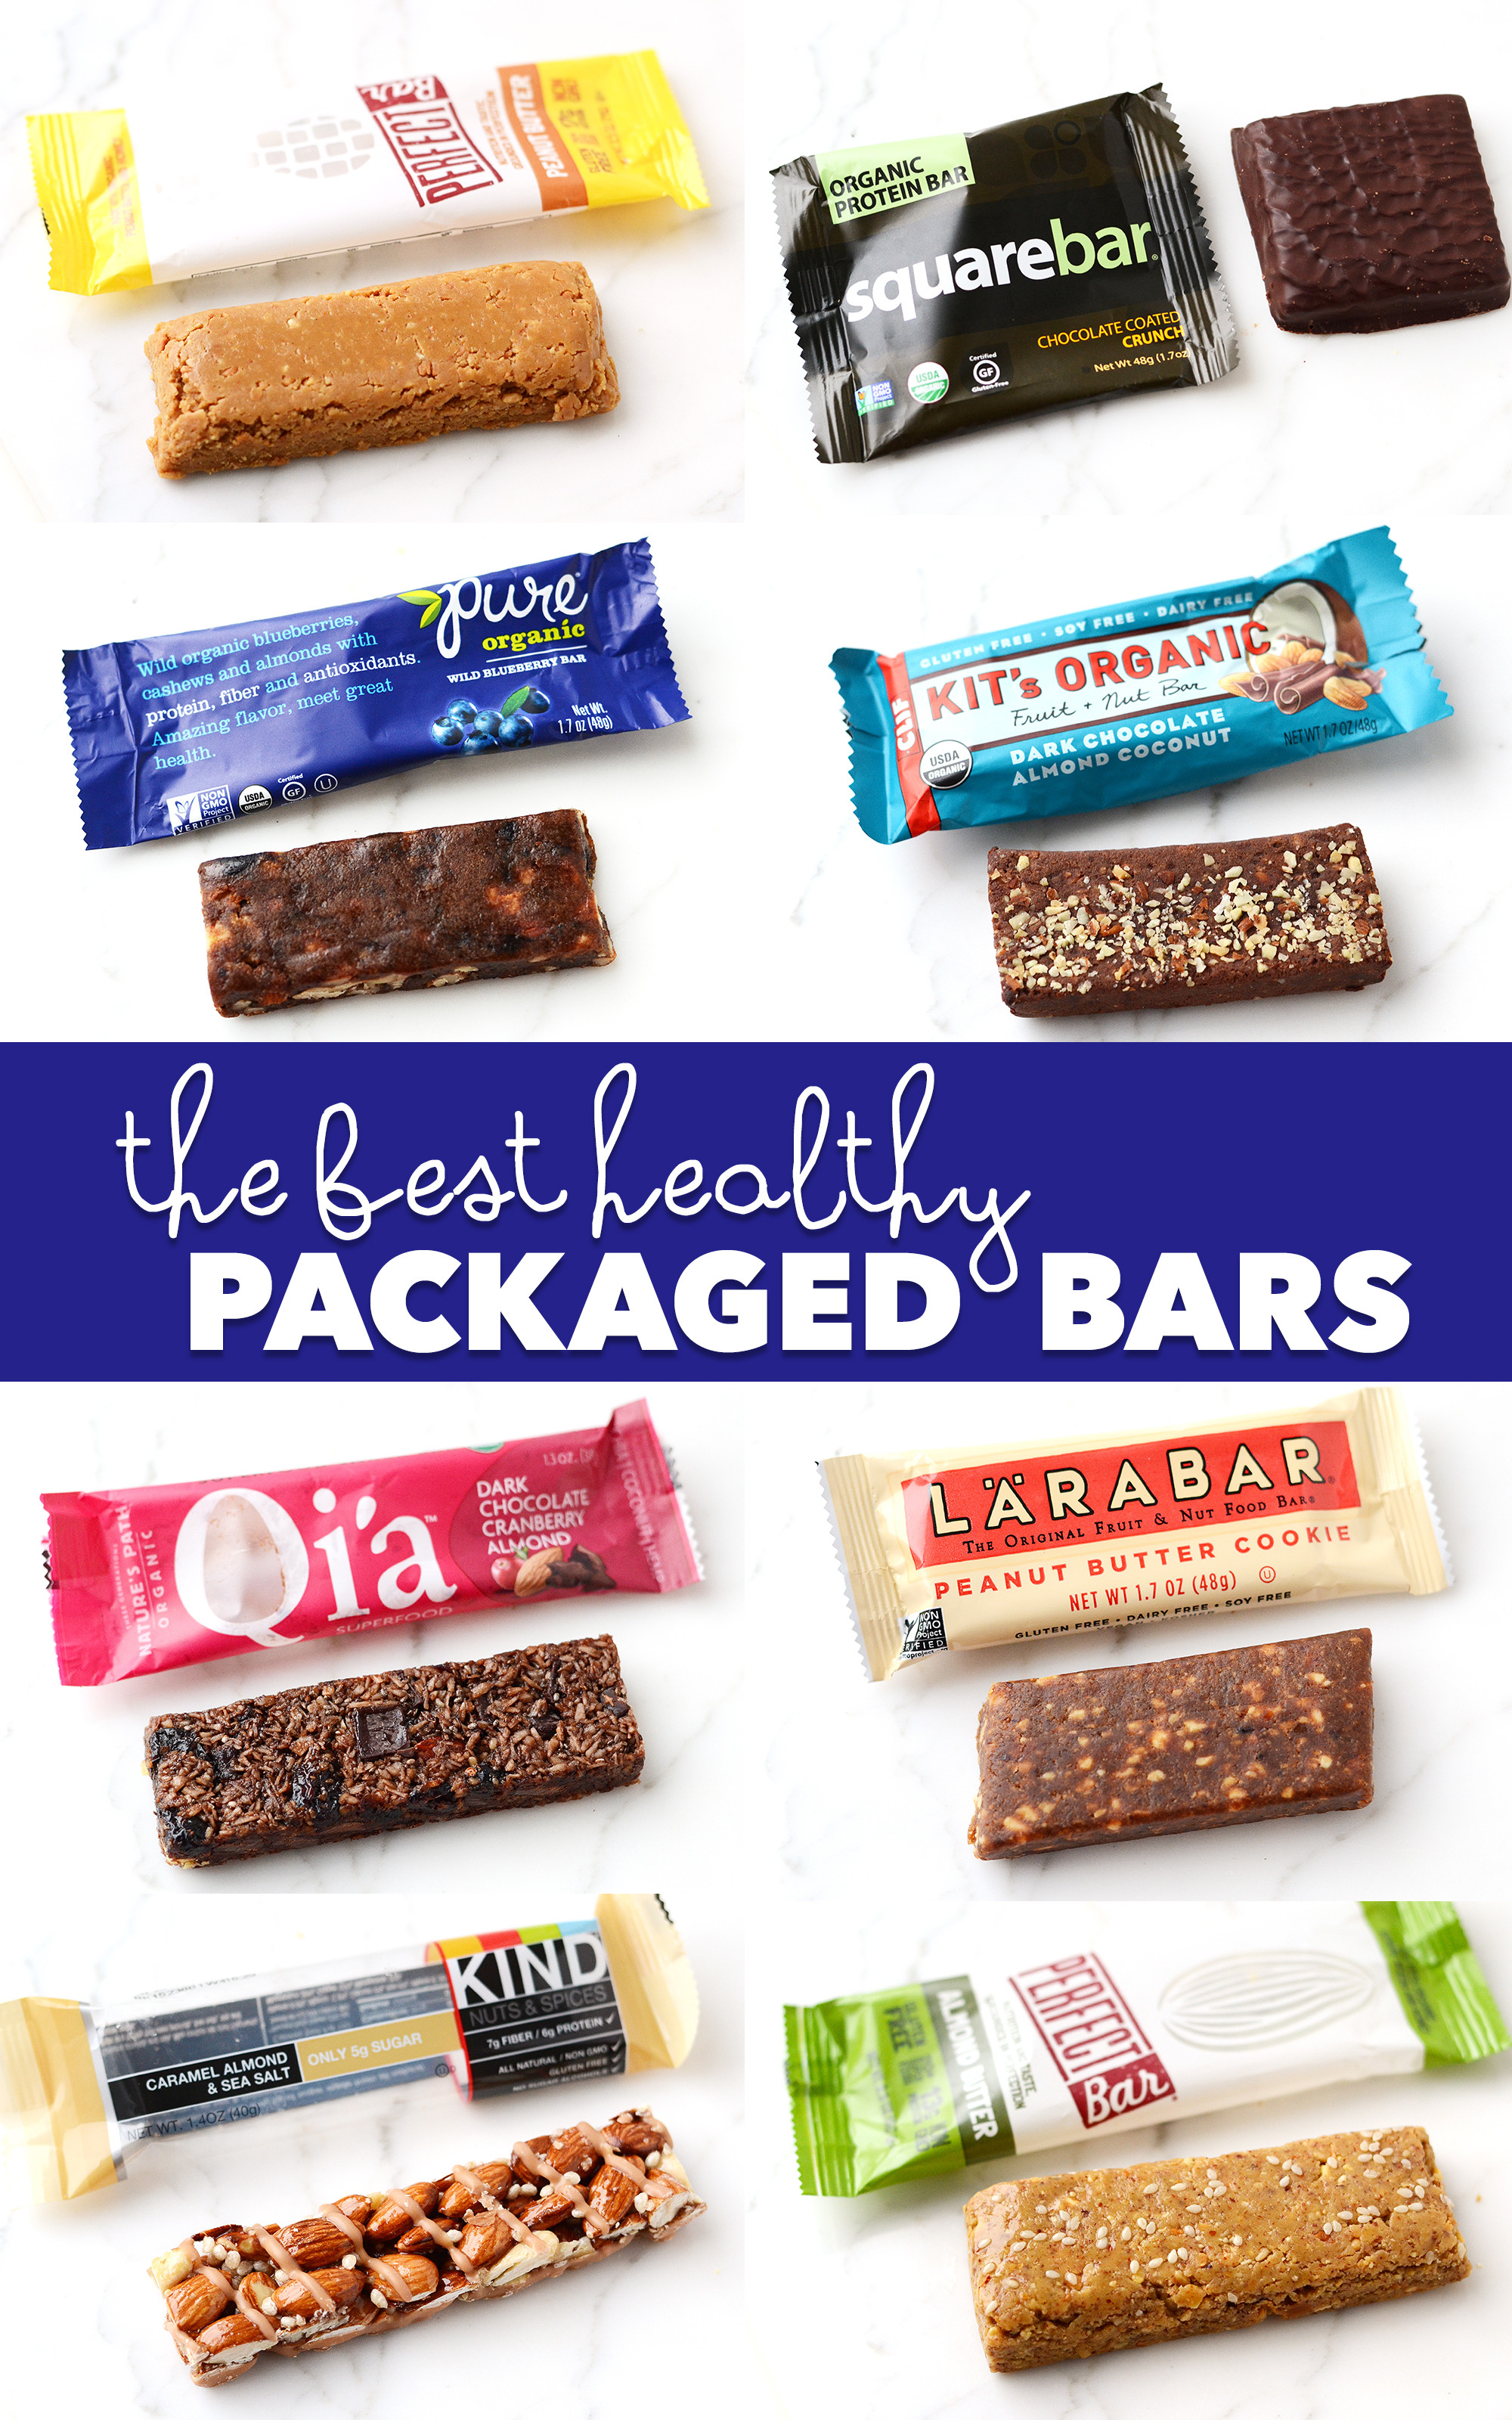 Healthy Chocolate Snacks To Buy
 The 7 Best Healthy Packaged Bars